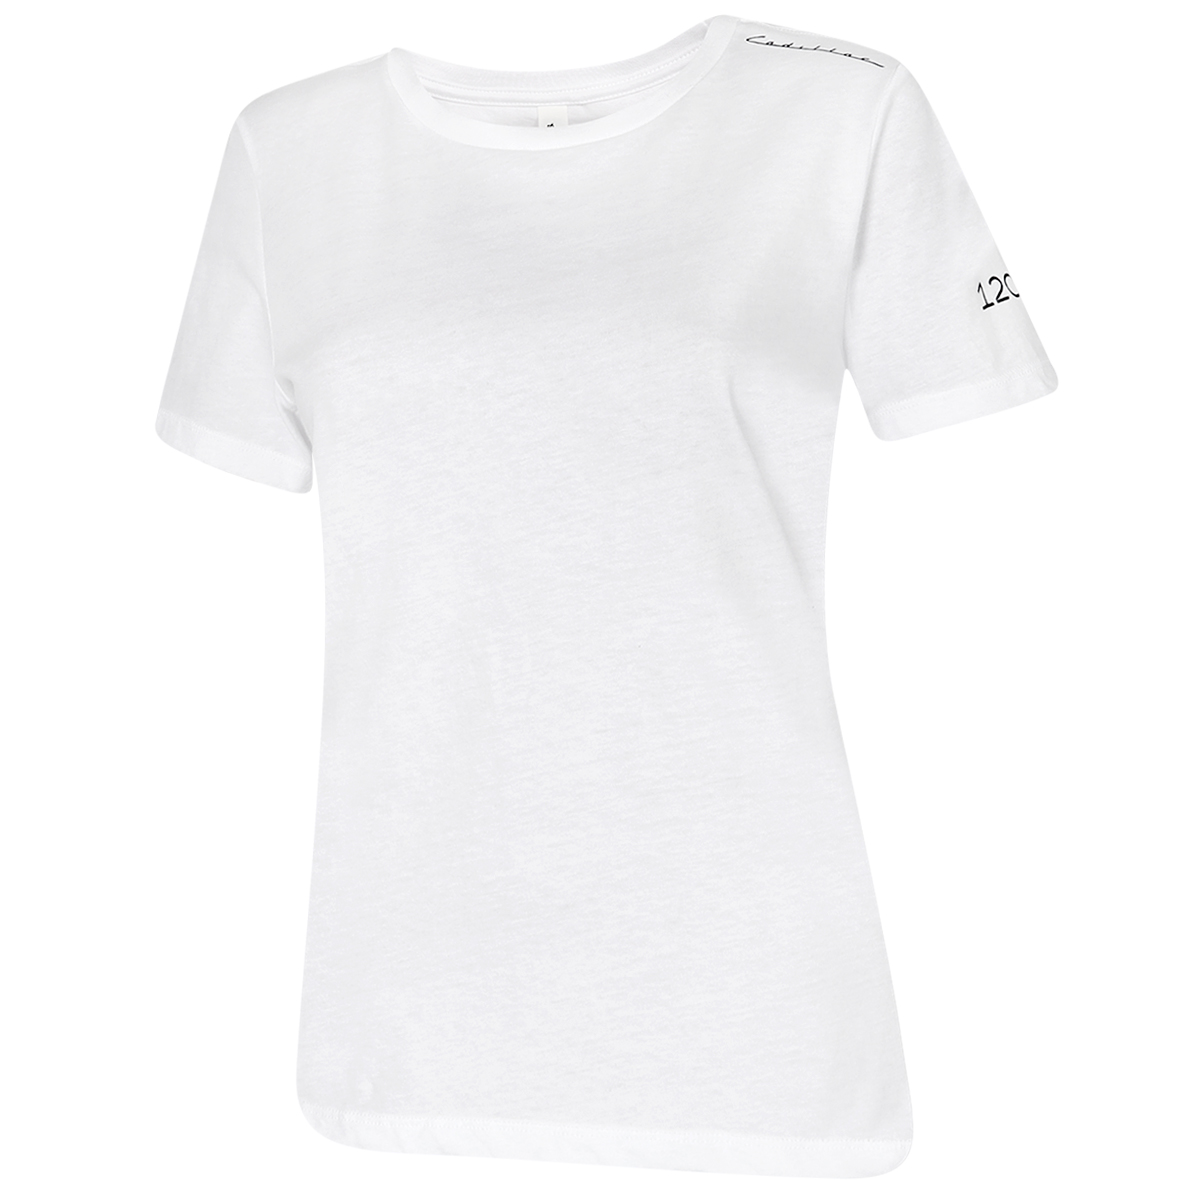 1947 BELLACANVAS Womens Relaxed Jersey Tee - White